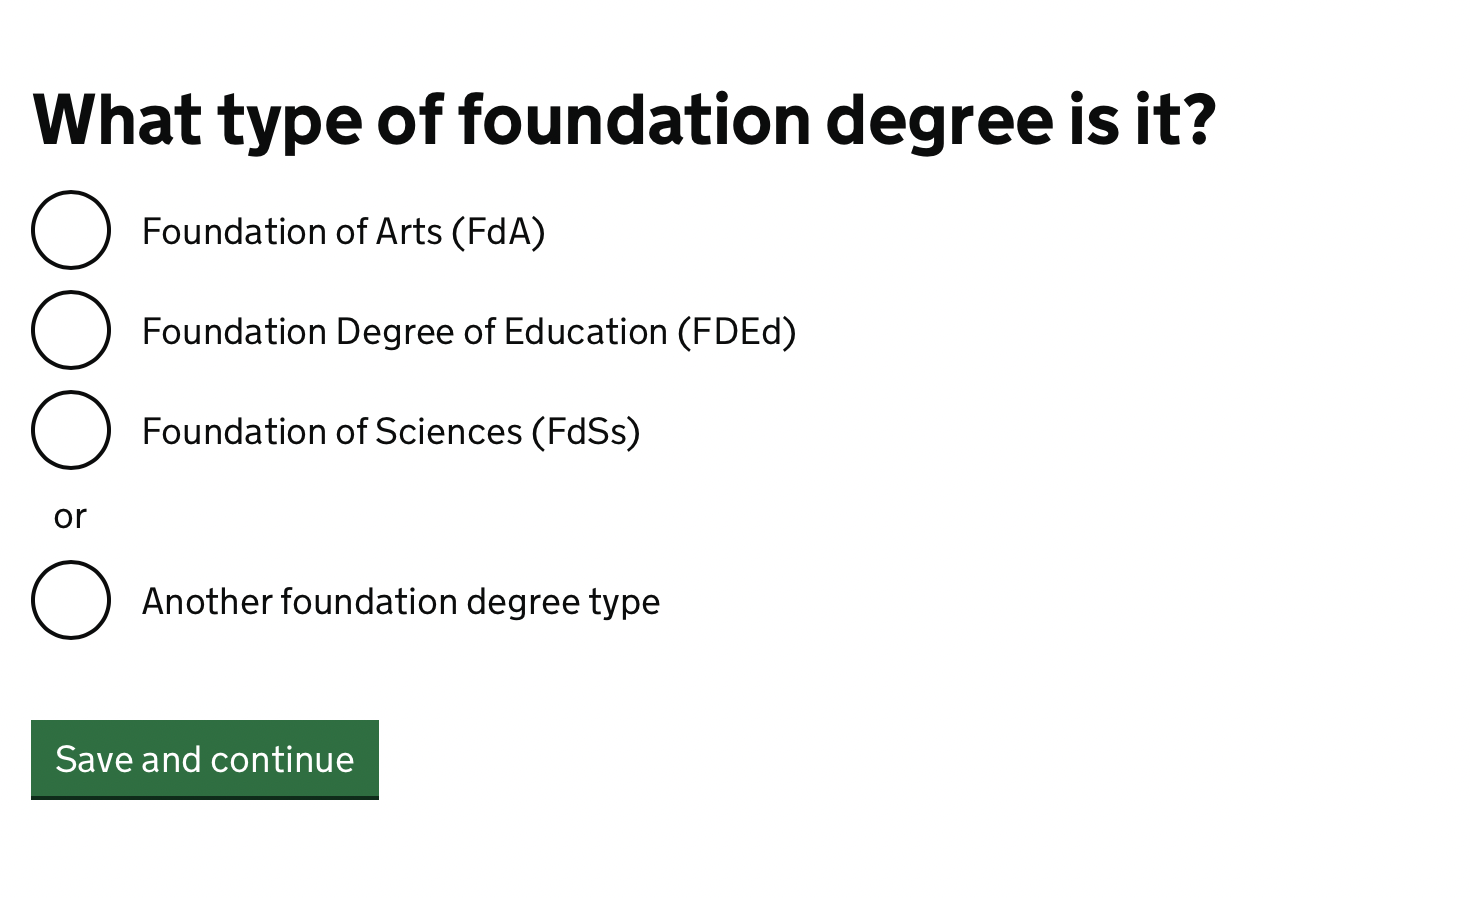 Screenshot showing question ‘What type of foundation degree is it?’ with radio button options for Foundation of Arts (FdA), Foundation Degree of Education (FDEd), Foundation of Sciences (FdSs) or Another foundation degree type